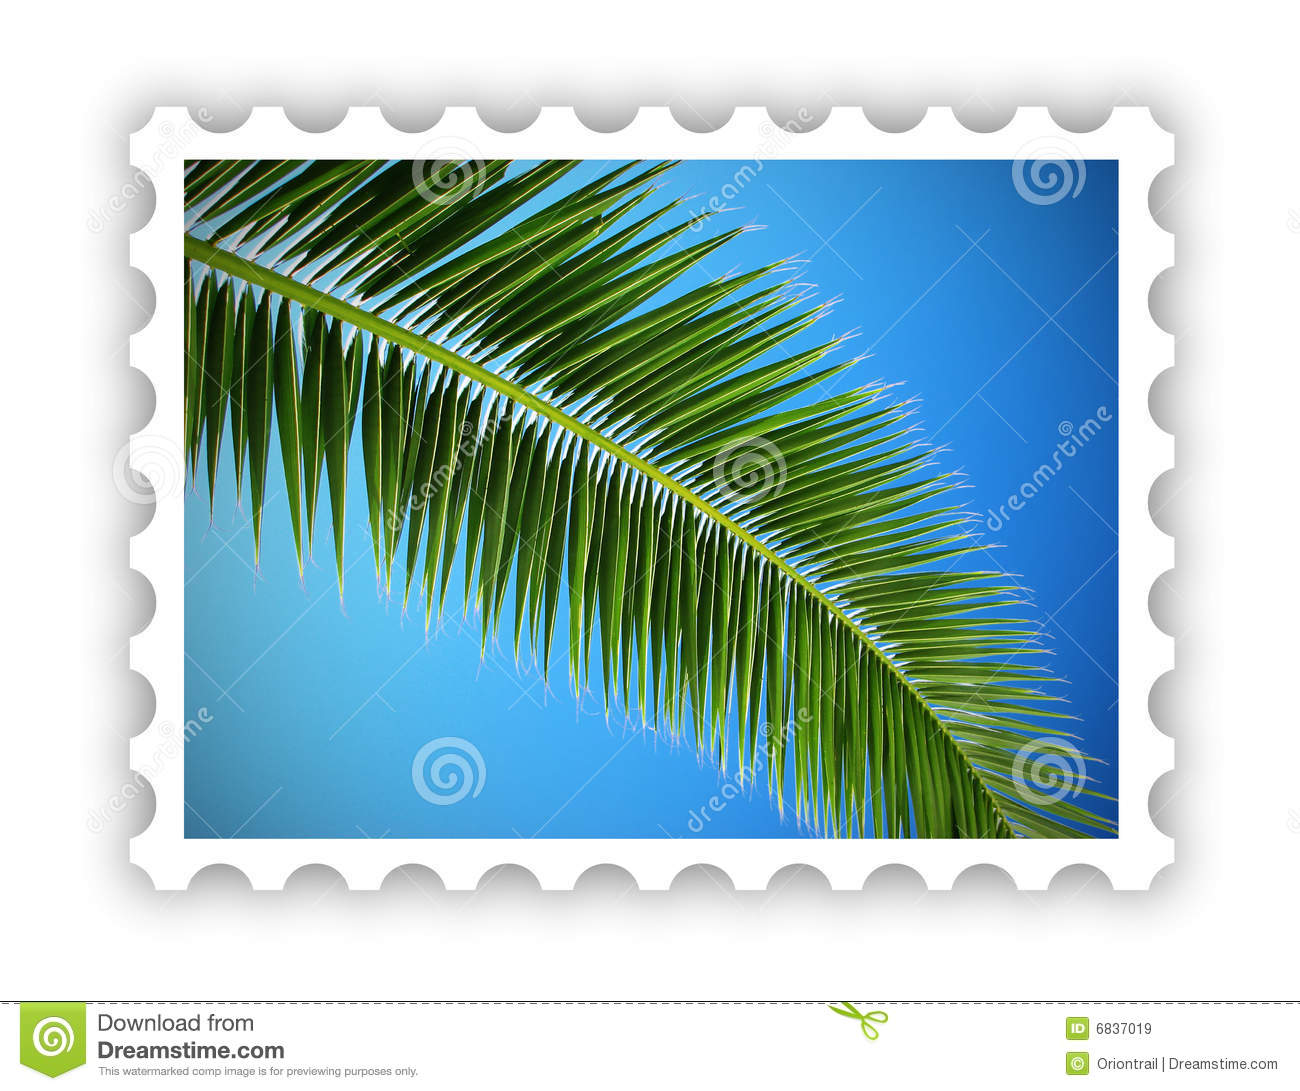 Tropical Palm Postage Stamp Royalty Free Stock Images   Image  6837019